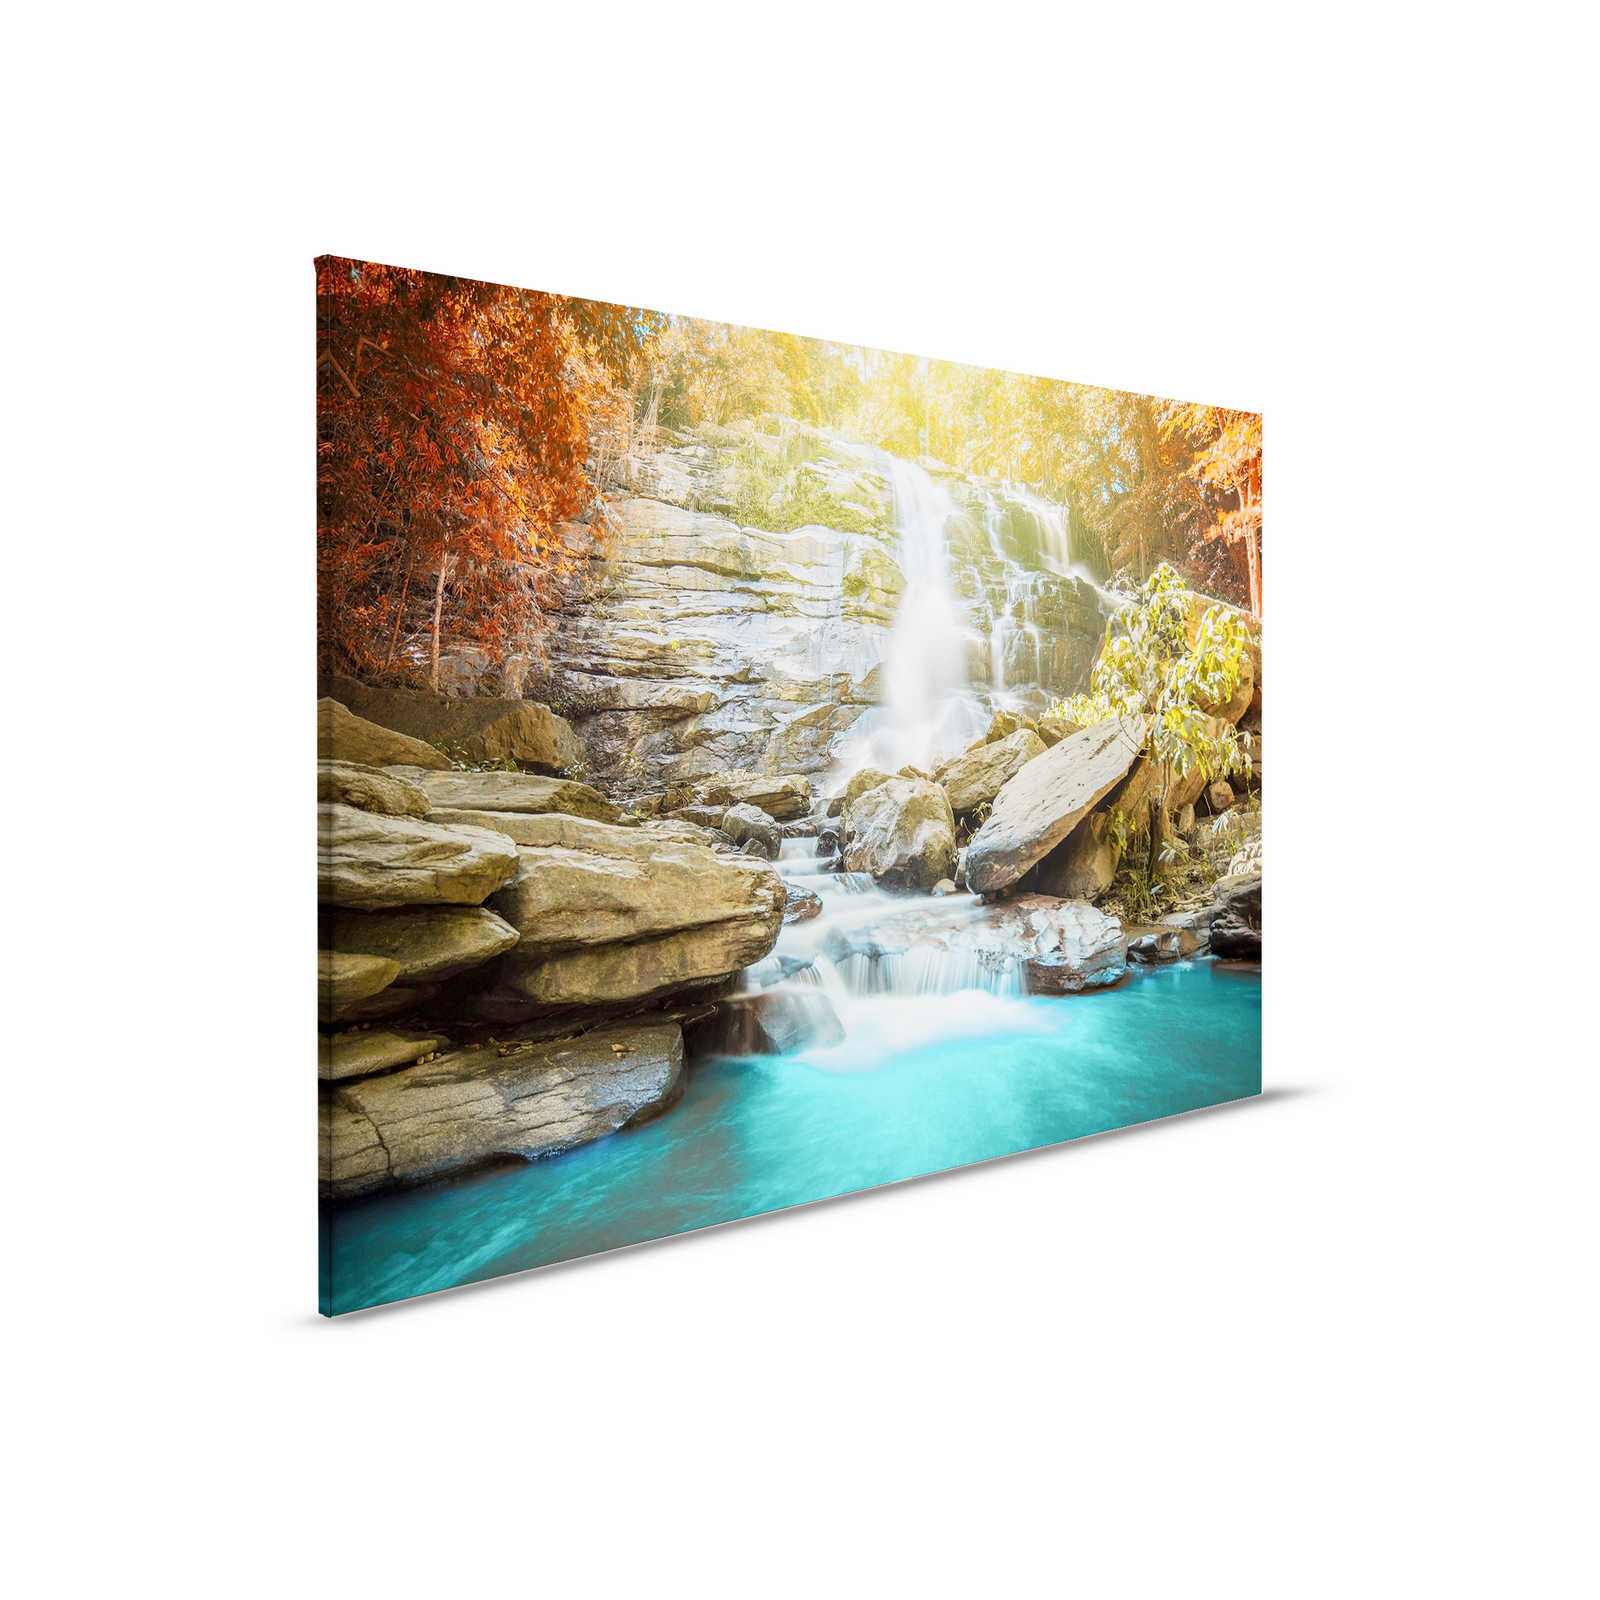         Canvas shows Idyllic Forest with Waterfall - 0.90 m x 0.60 m
    